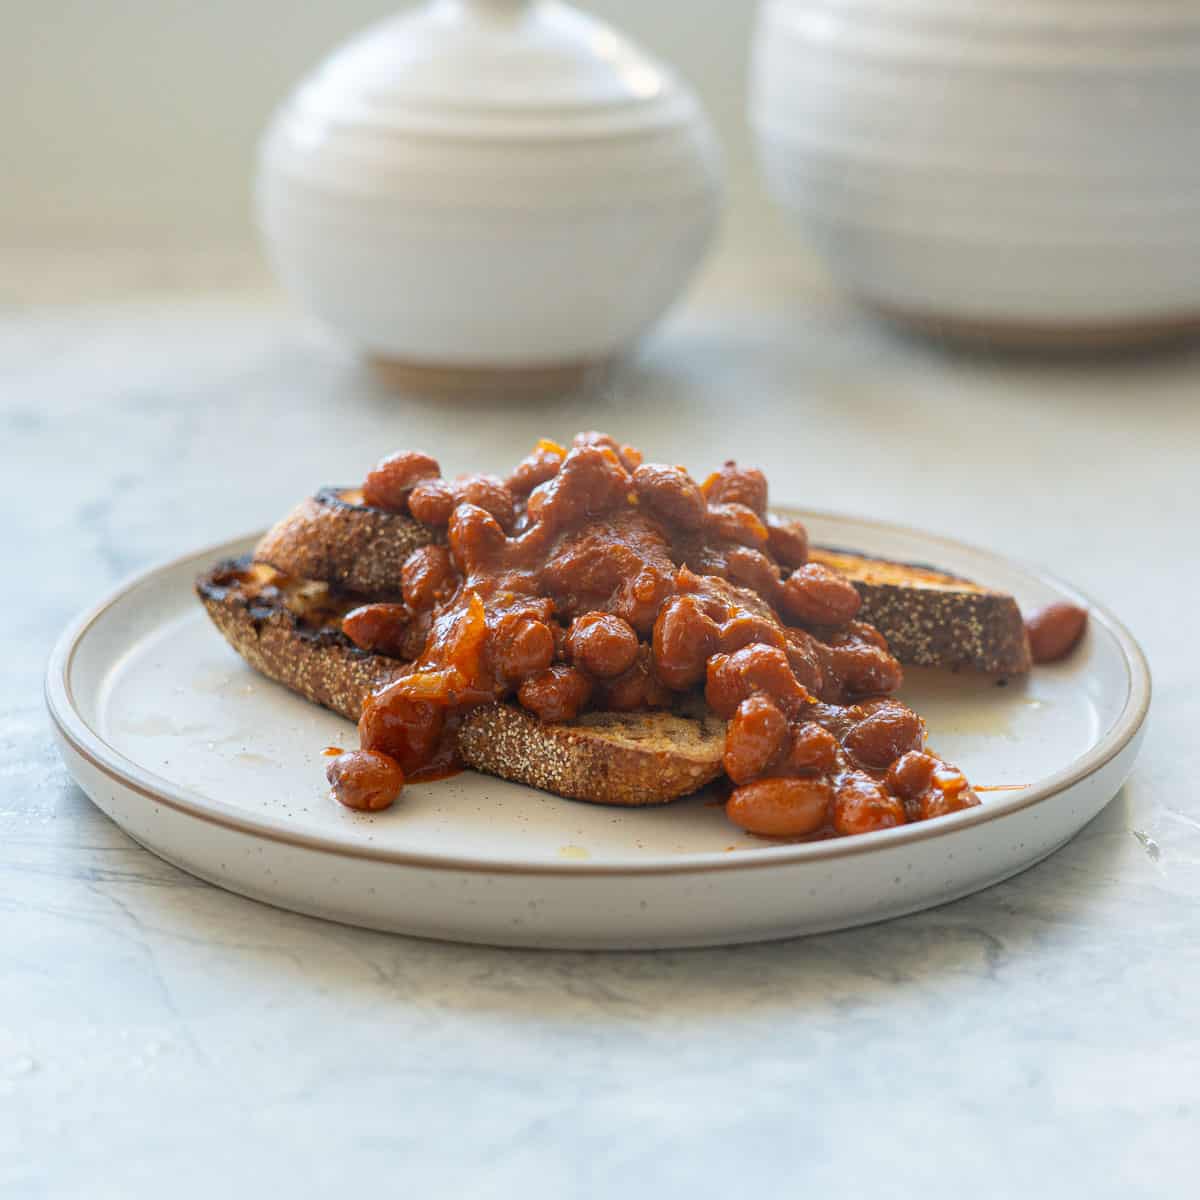 Two slices of rustic toast topped with baked beans on a  white plate with brown rim.